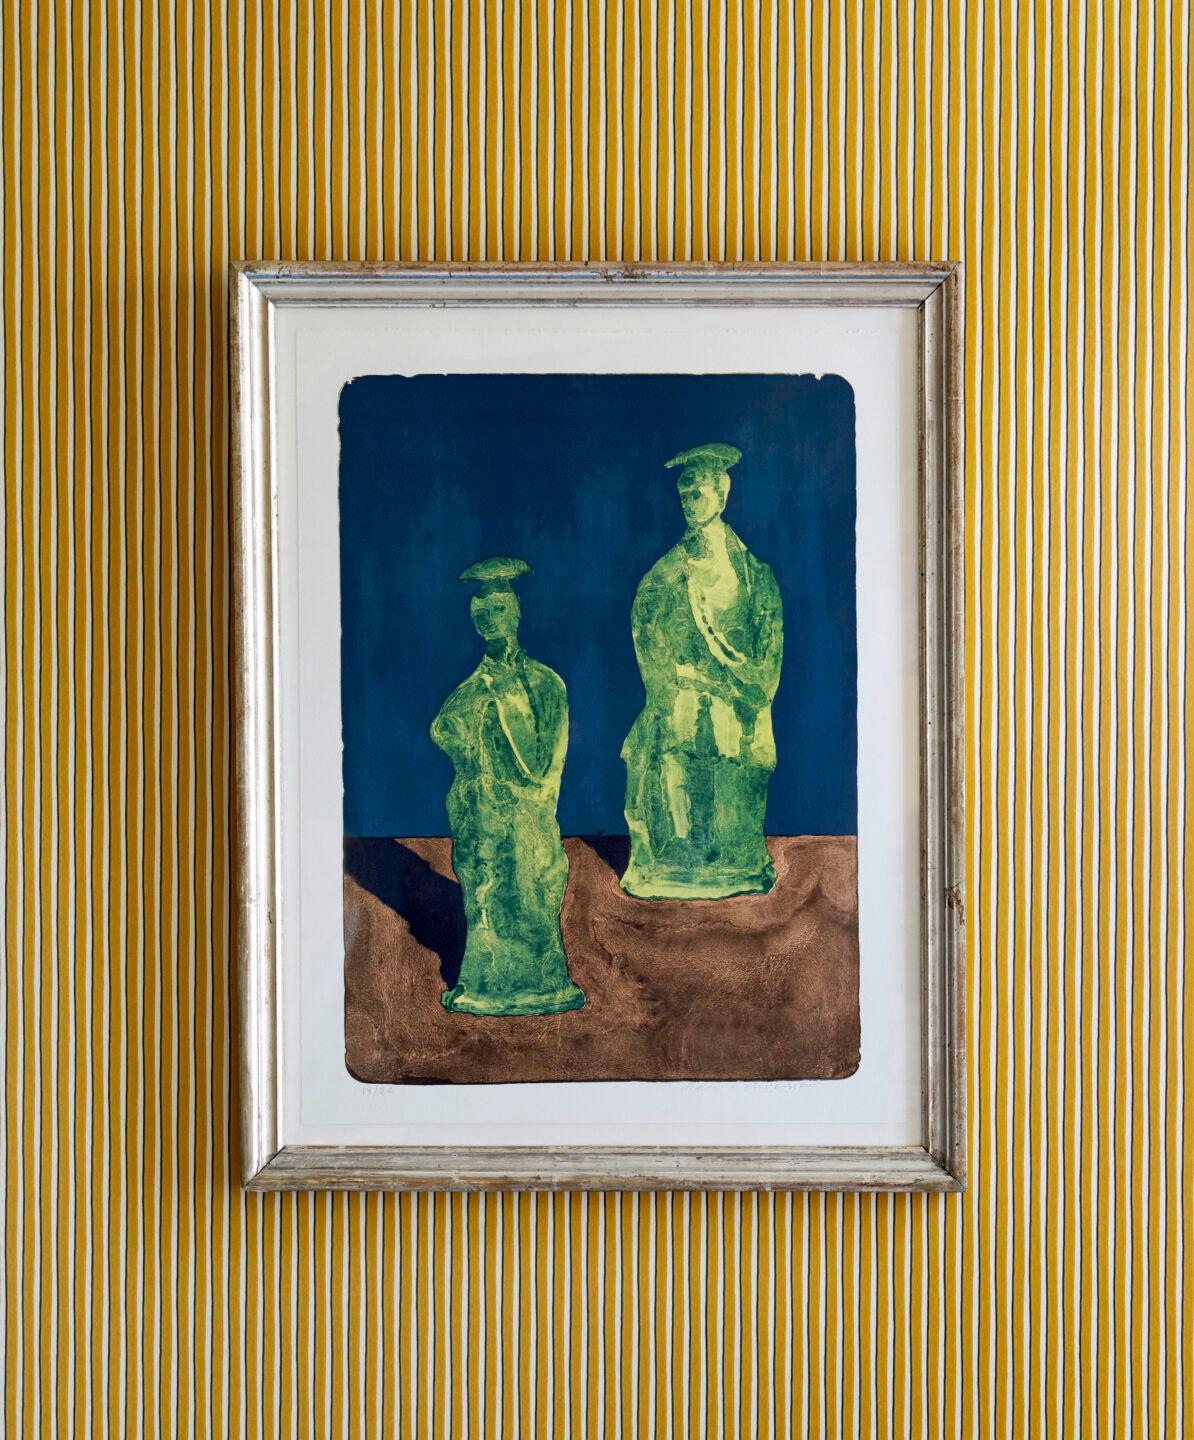 Karin Mamma Andersson
Denmark, 2017

“Still Life” lithograph printed in colors. The lithography is signed and numbered from an edition of 50. Paired with a vintage frame in silver with patiná. 

Mamma Andersson is a contemporary Swedish